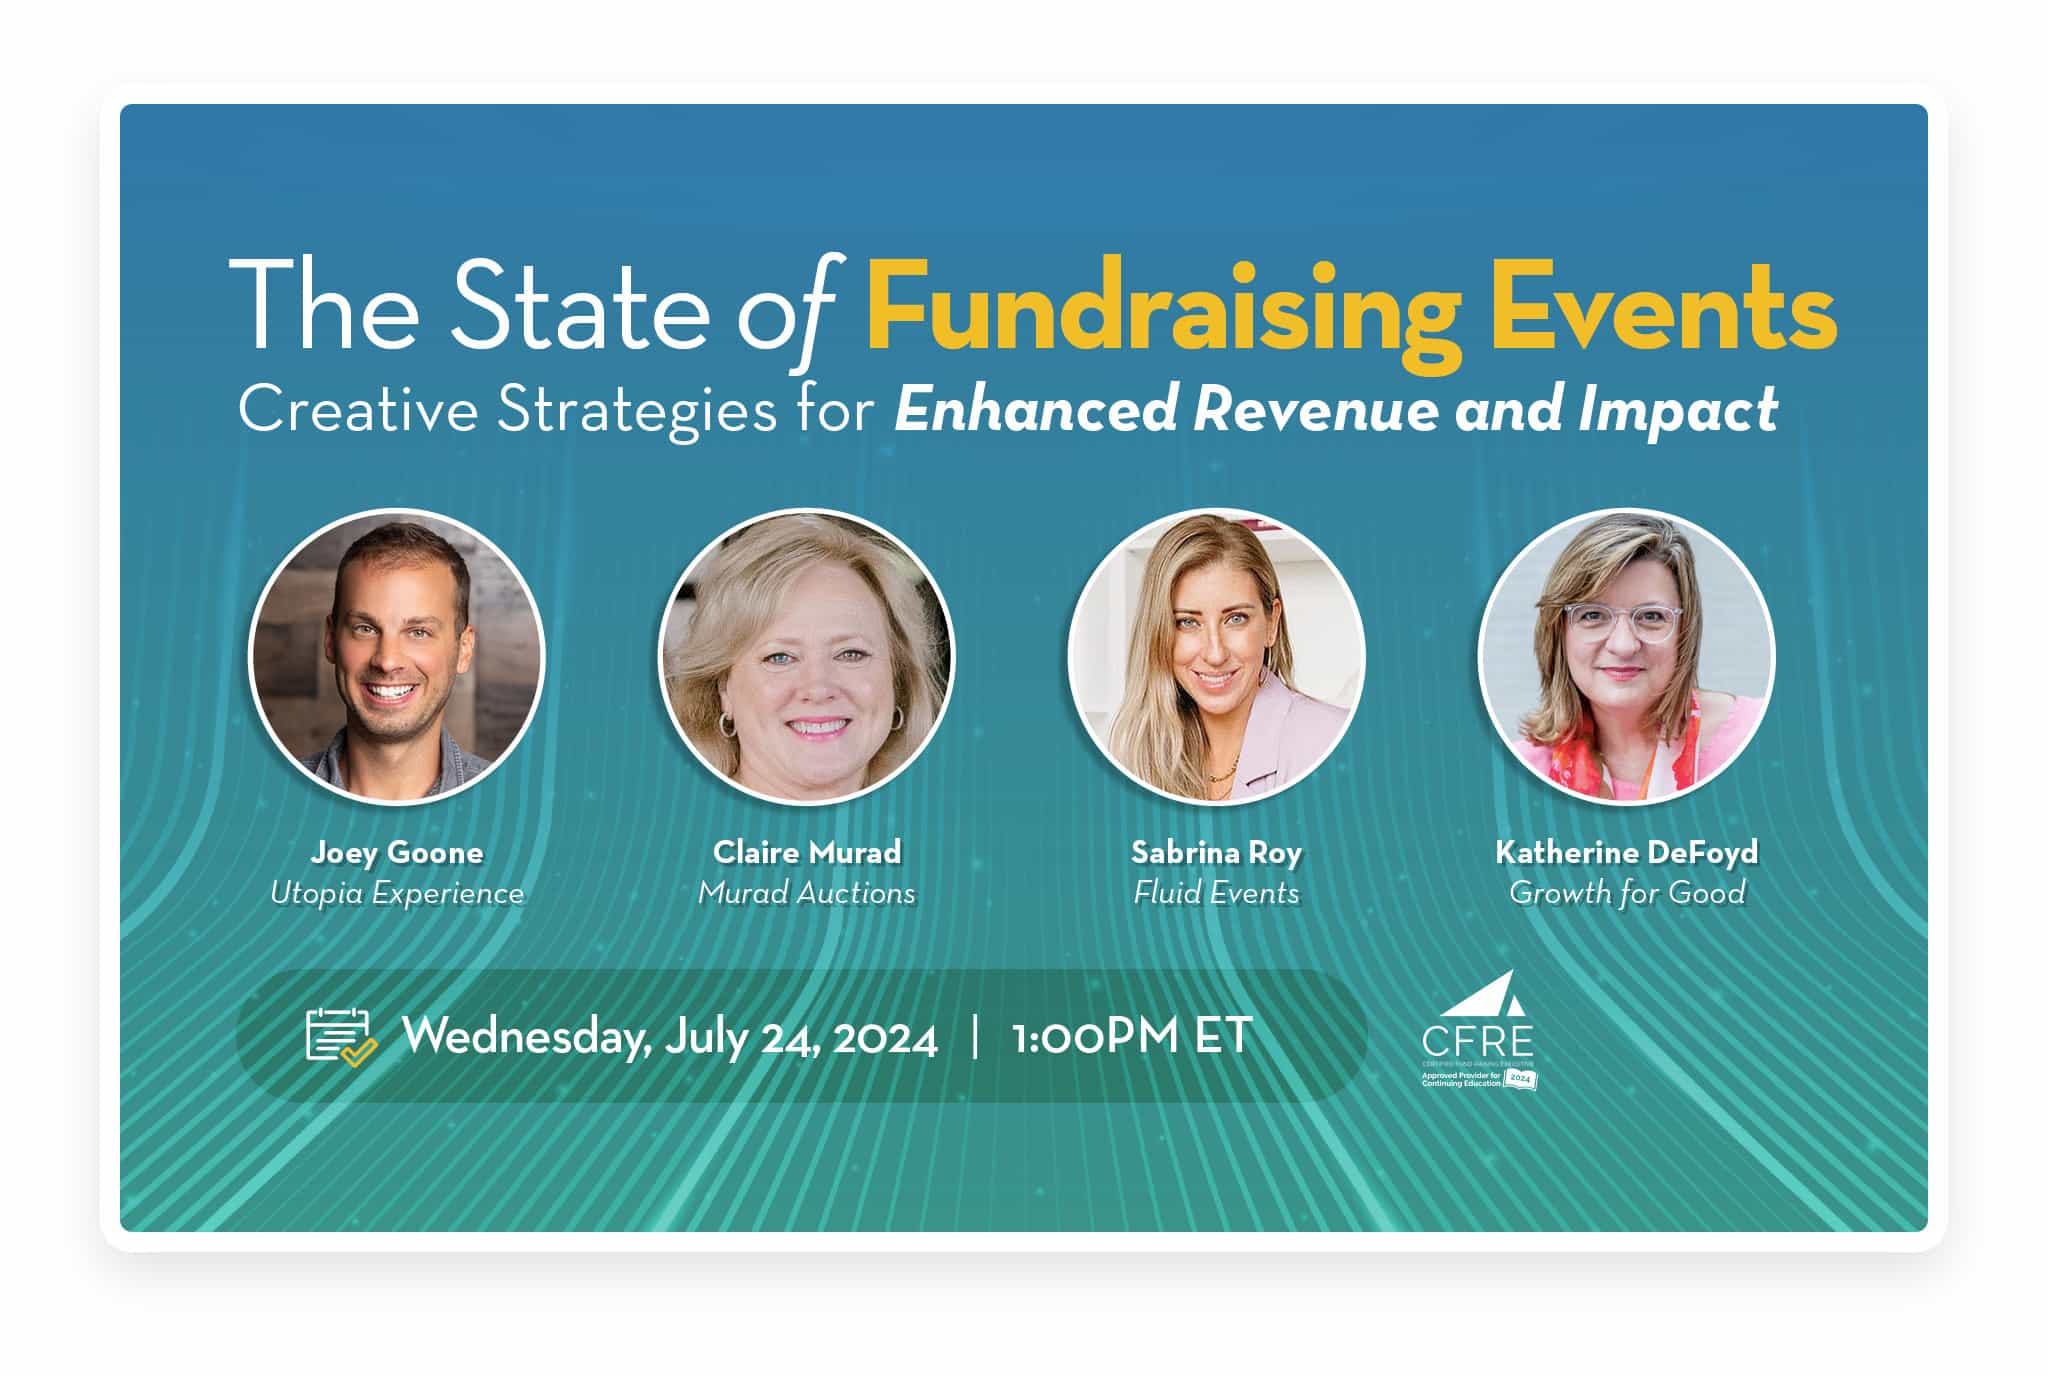 [WEBINAR] State of Fundraising Events